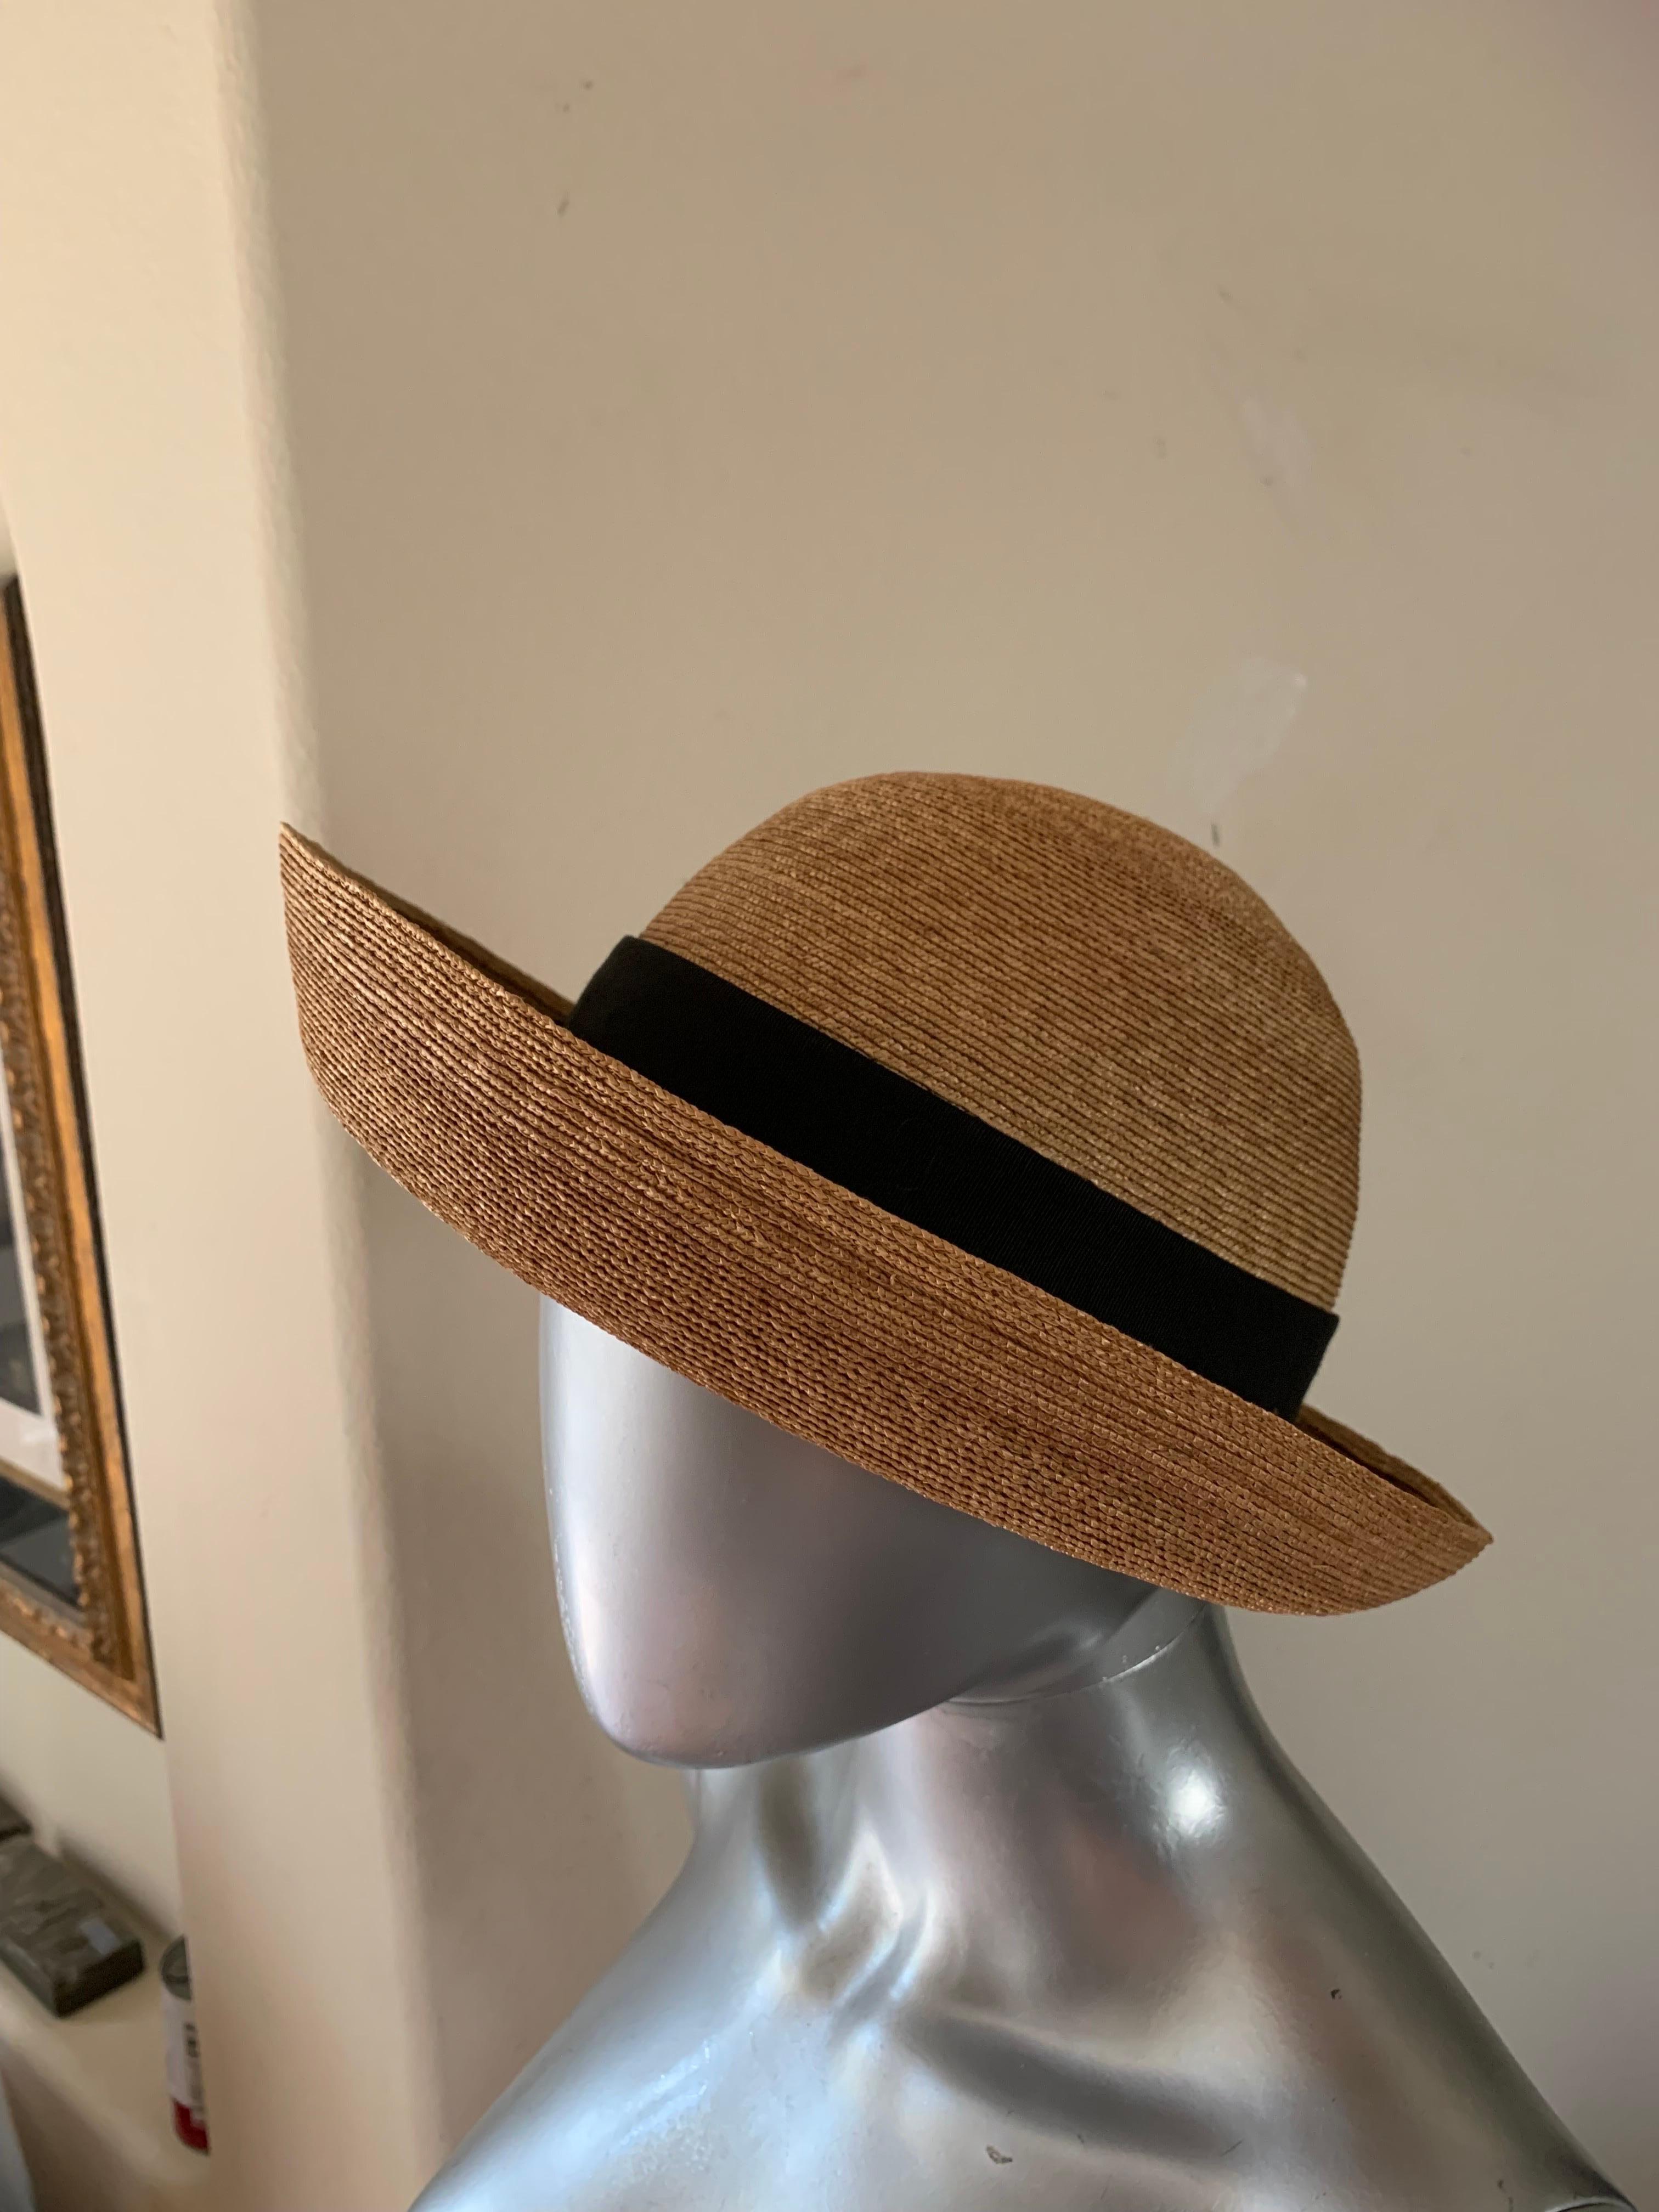 Tracey Tooker Straw Boater Hat with Black Grosgrain Bow NWOT In Good Condition For Sale In Palm Springs, CA